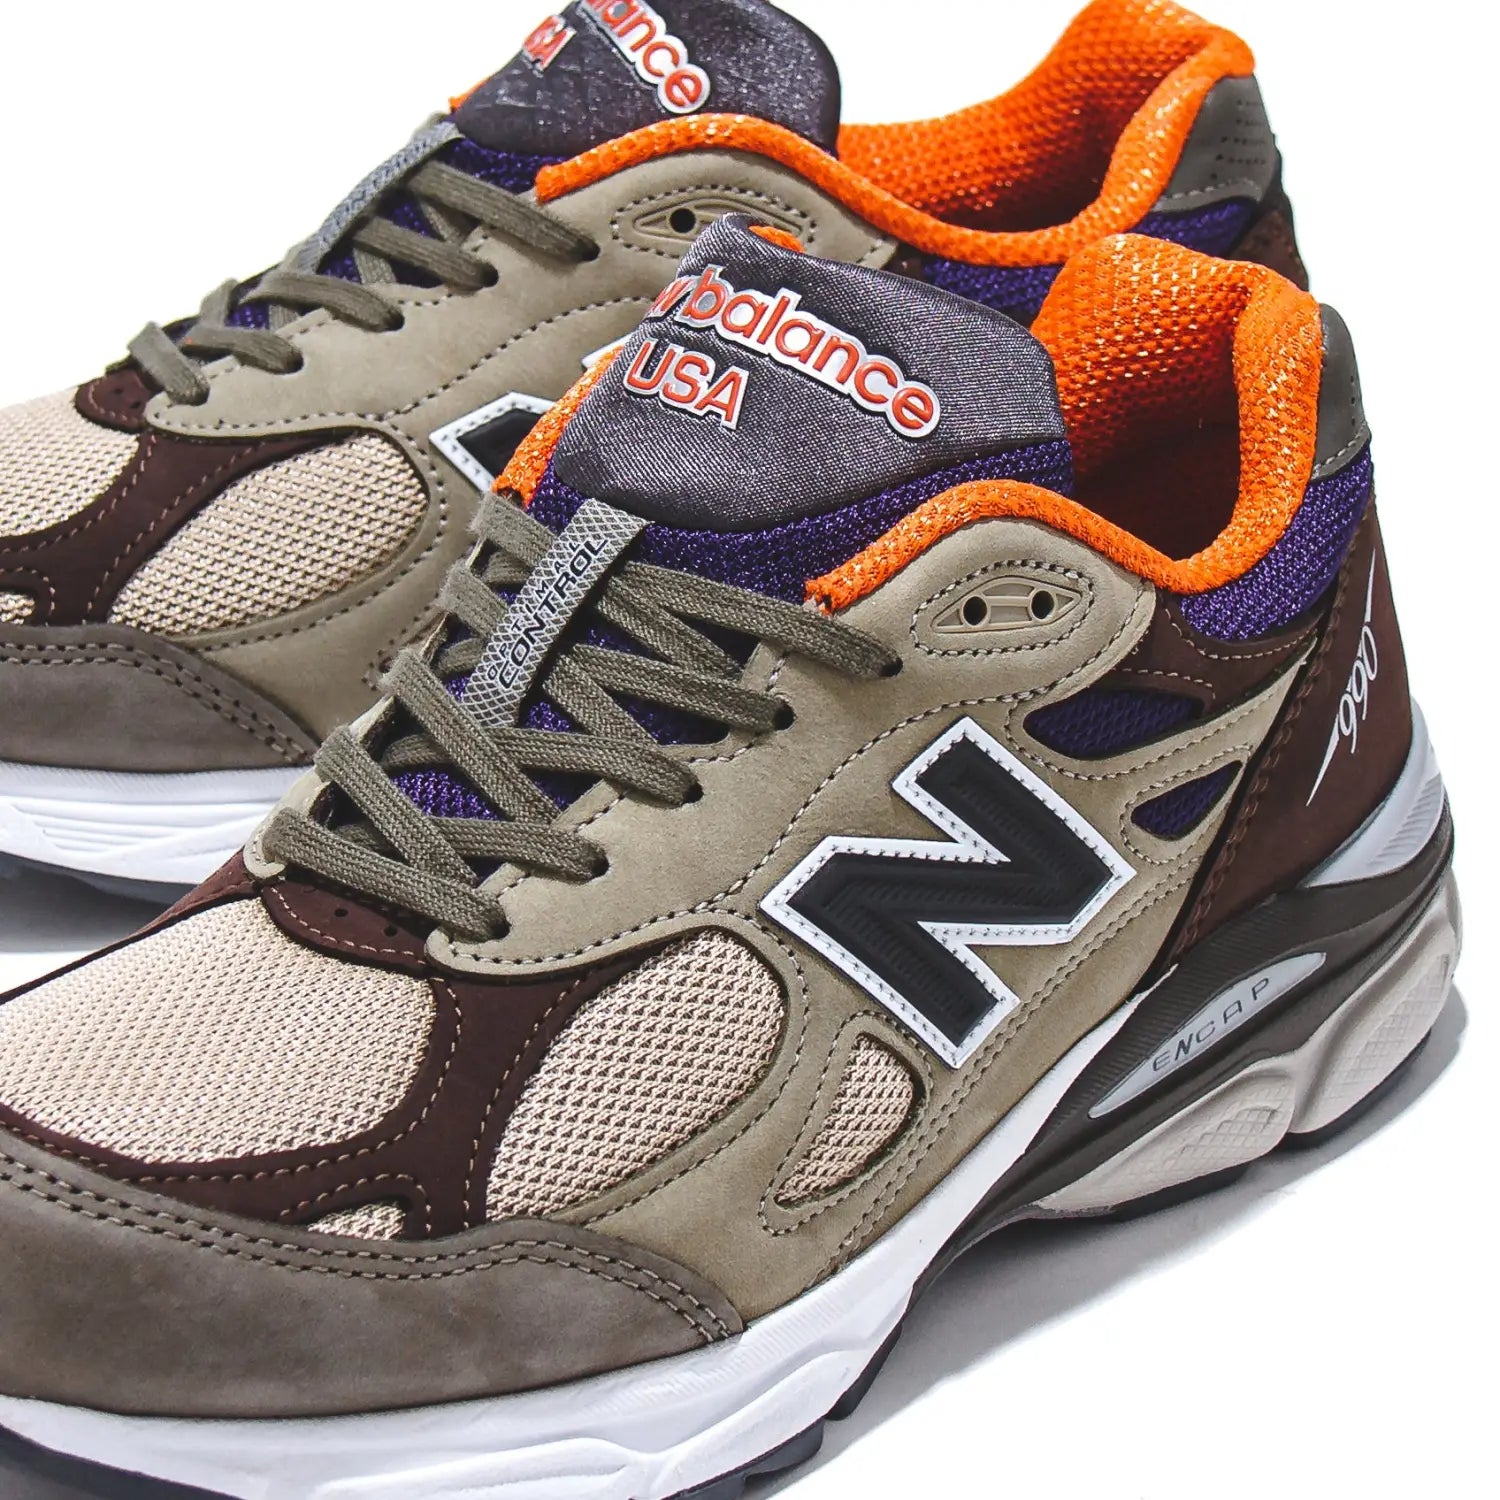 Check out the New Balance Made in USA Season 2 M990BT3